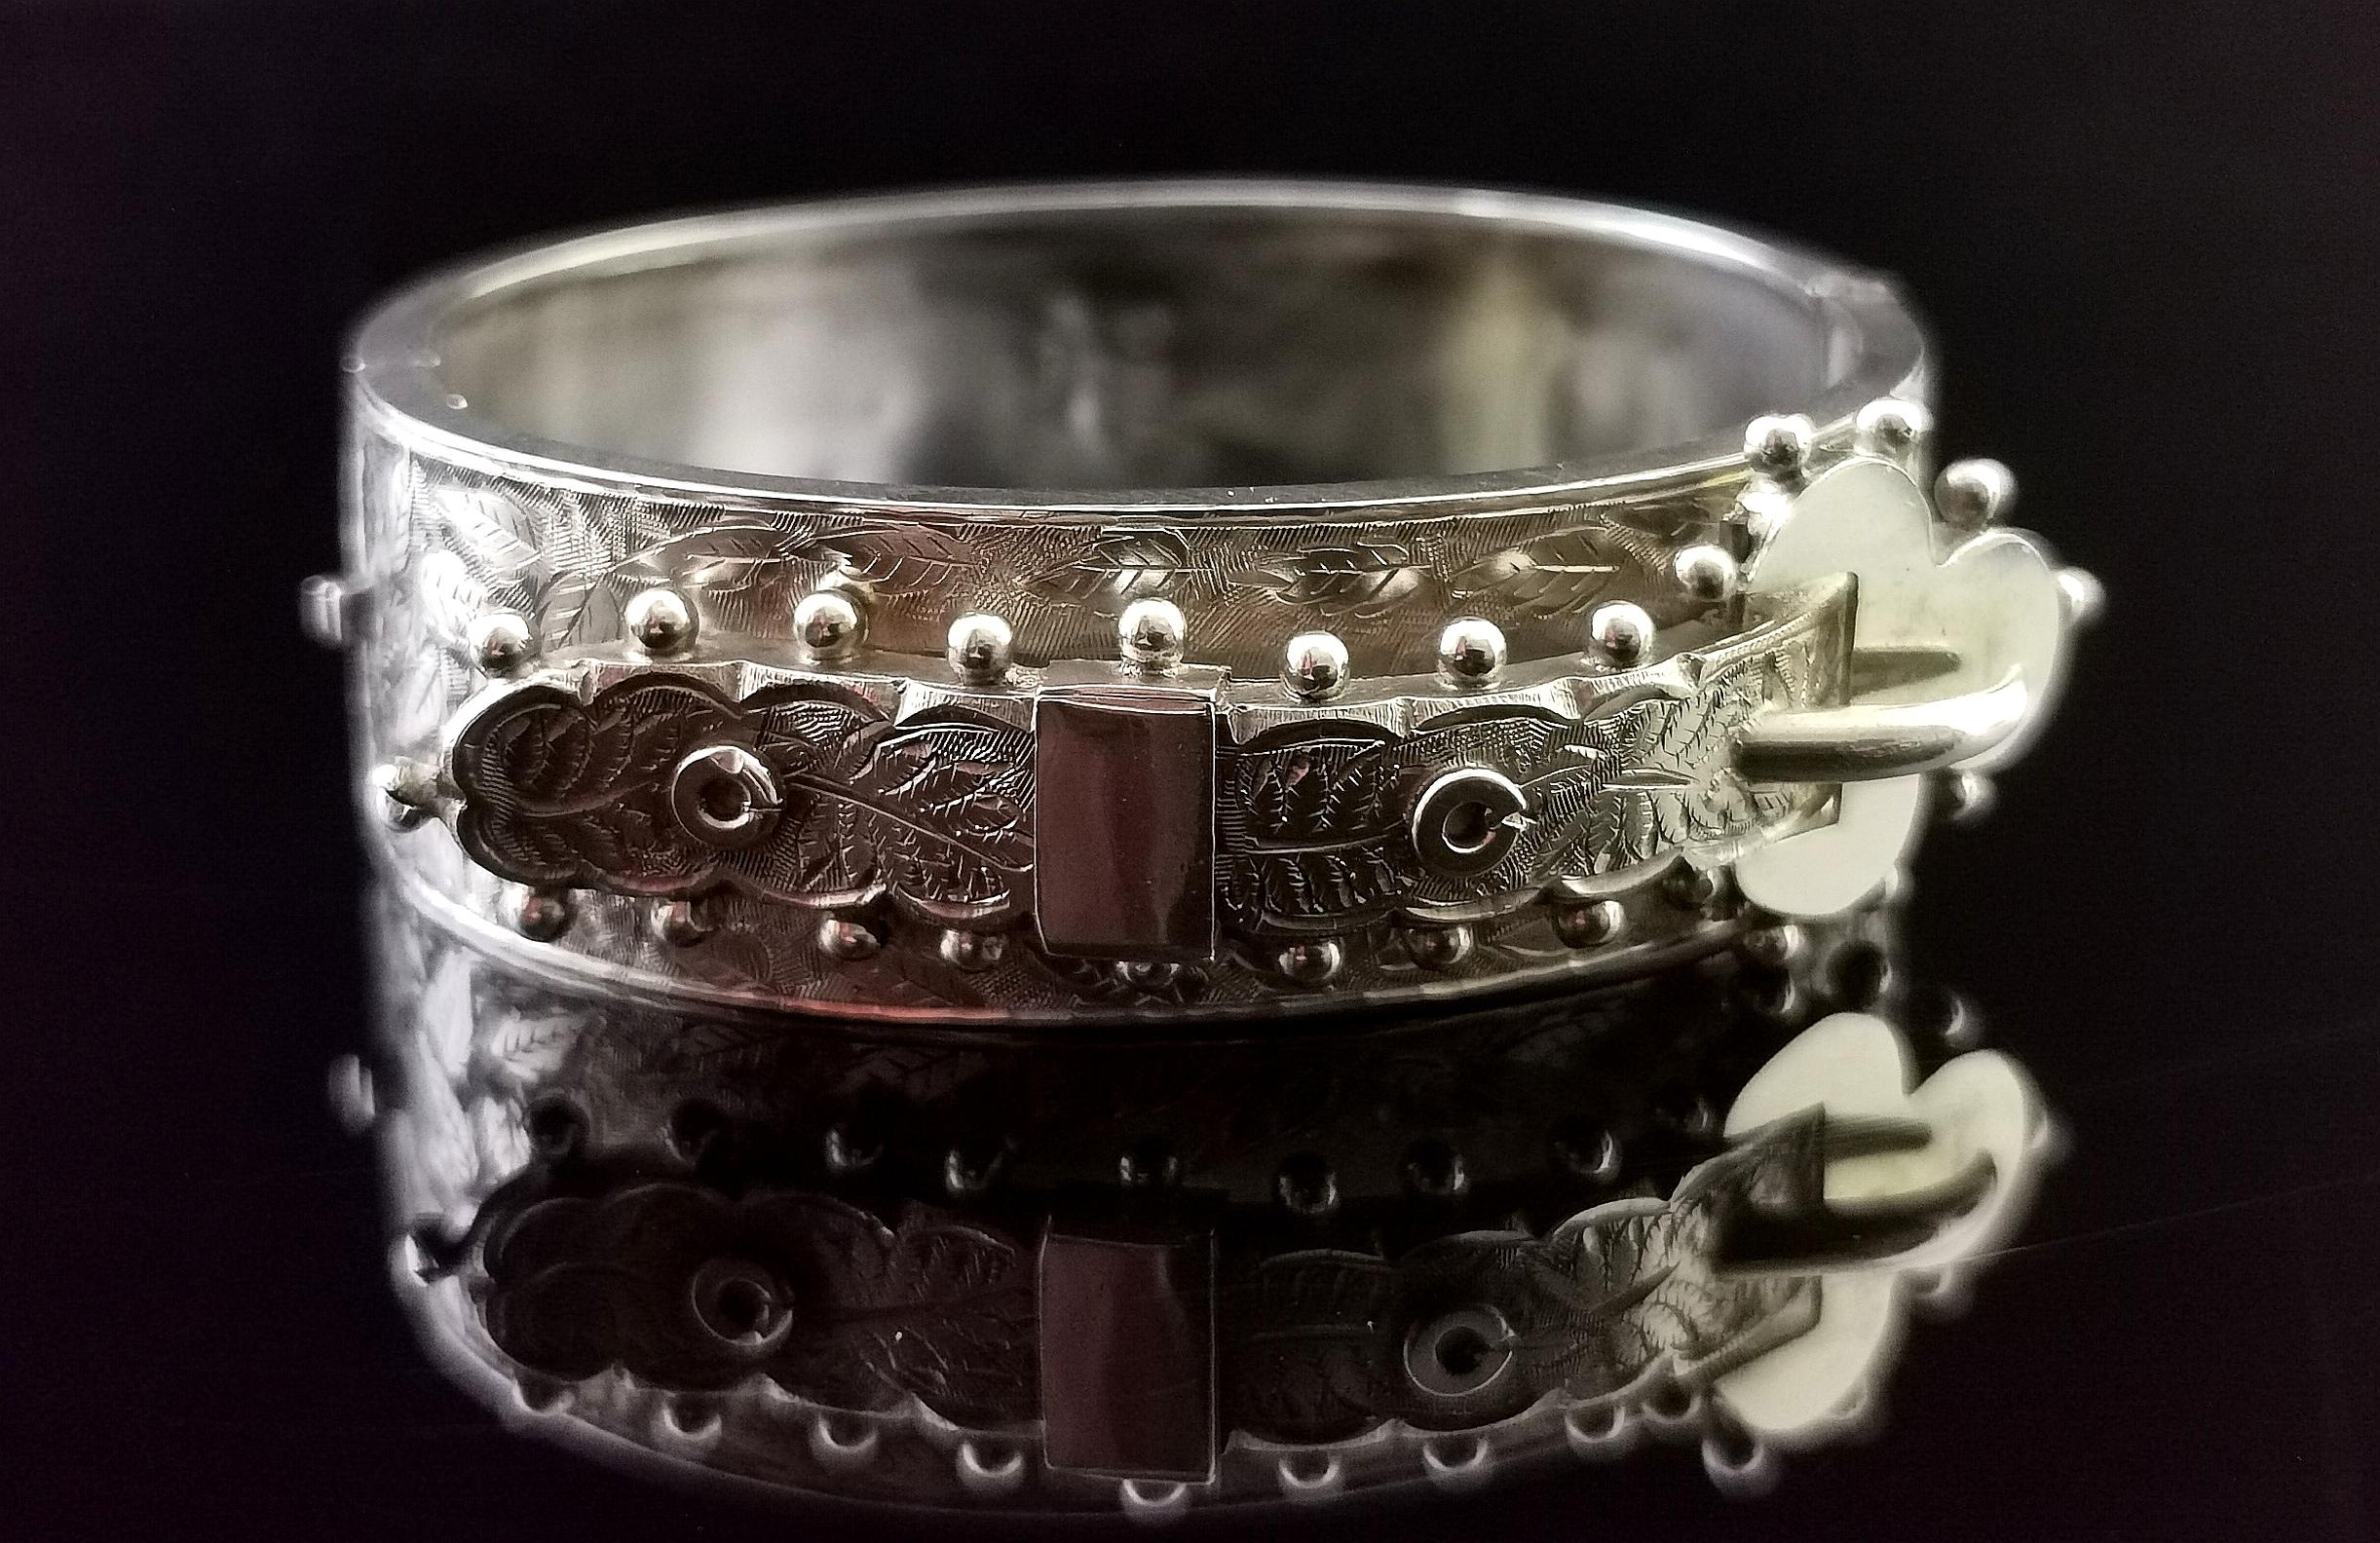 A beautiful antique Victorian era sterling silver buckle bangle.

It has an elaborate buckle design front with a beaded edge and engraved with fern leaves.

The reverse has a smooth polished finish and the bangle has a push clasp.

A beautiful and